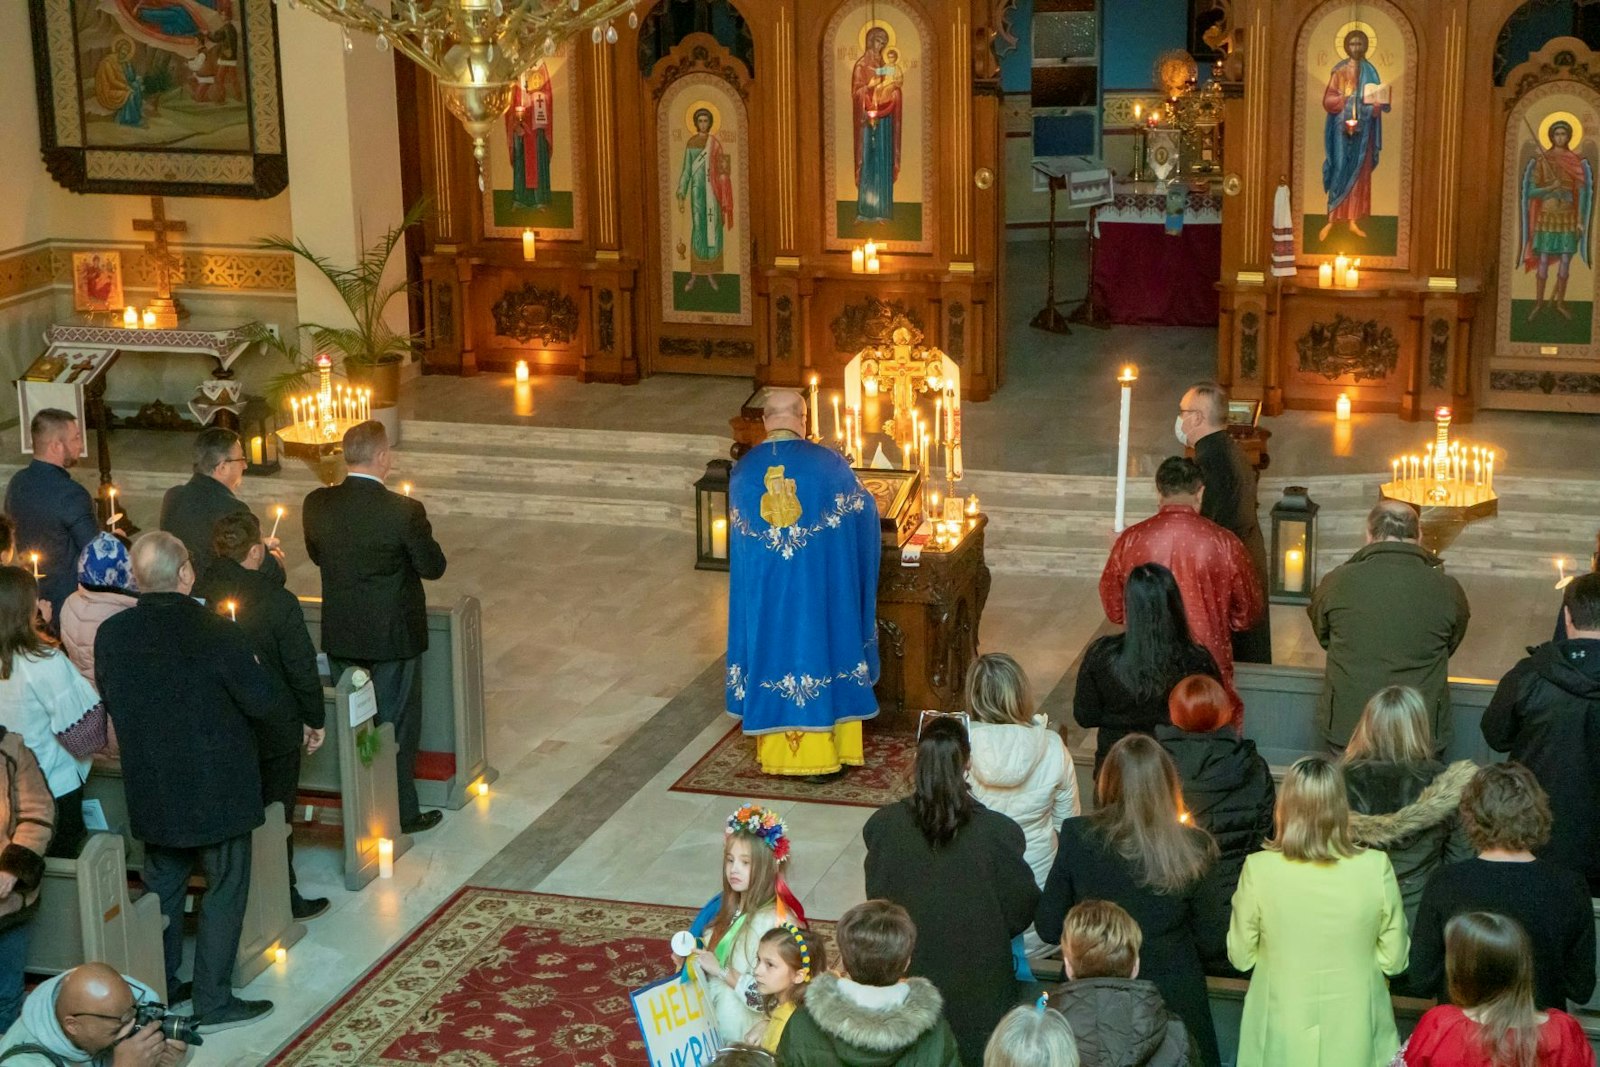 Fr. Paul Bodnarchuk, rector of St. Mary the Protectress Ukrainian Orthodox Cathedral in Southfield, leads an ecumenical prayer vigil for the people of Ukraine on Feb. 24, the one-year anniversary of Russia's invasion. (Matthew Rich | Special to Detroit Catholic)